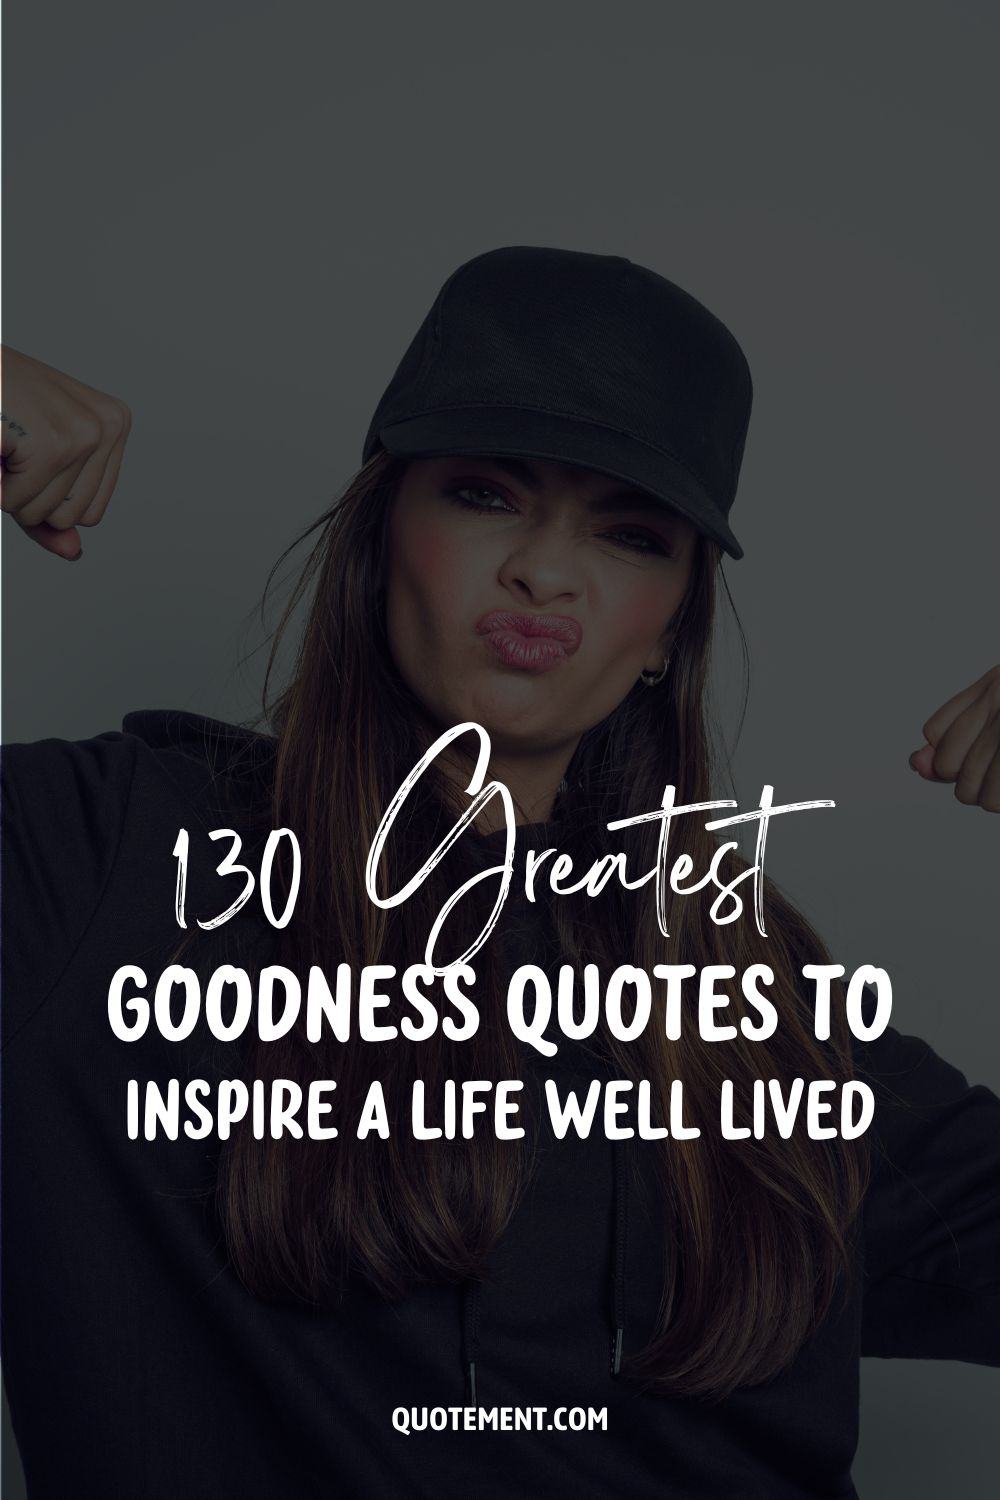 130 Greatest Goodness Quotes To Inspire A Life Well Lived